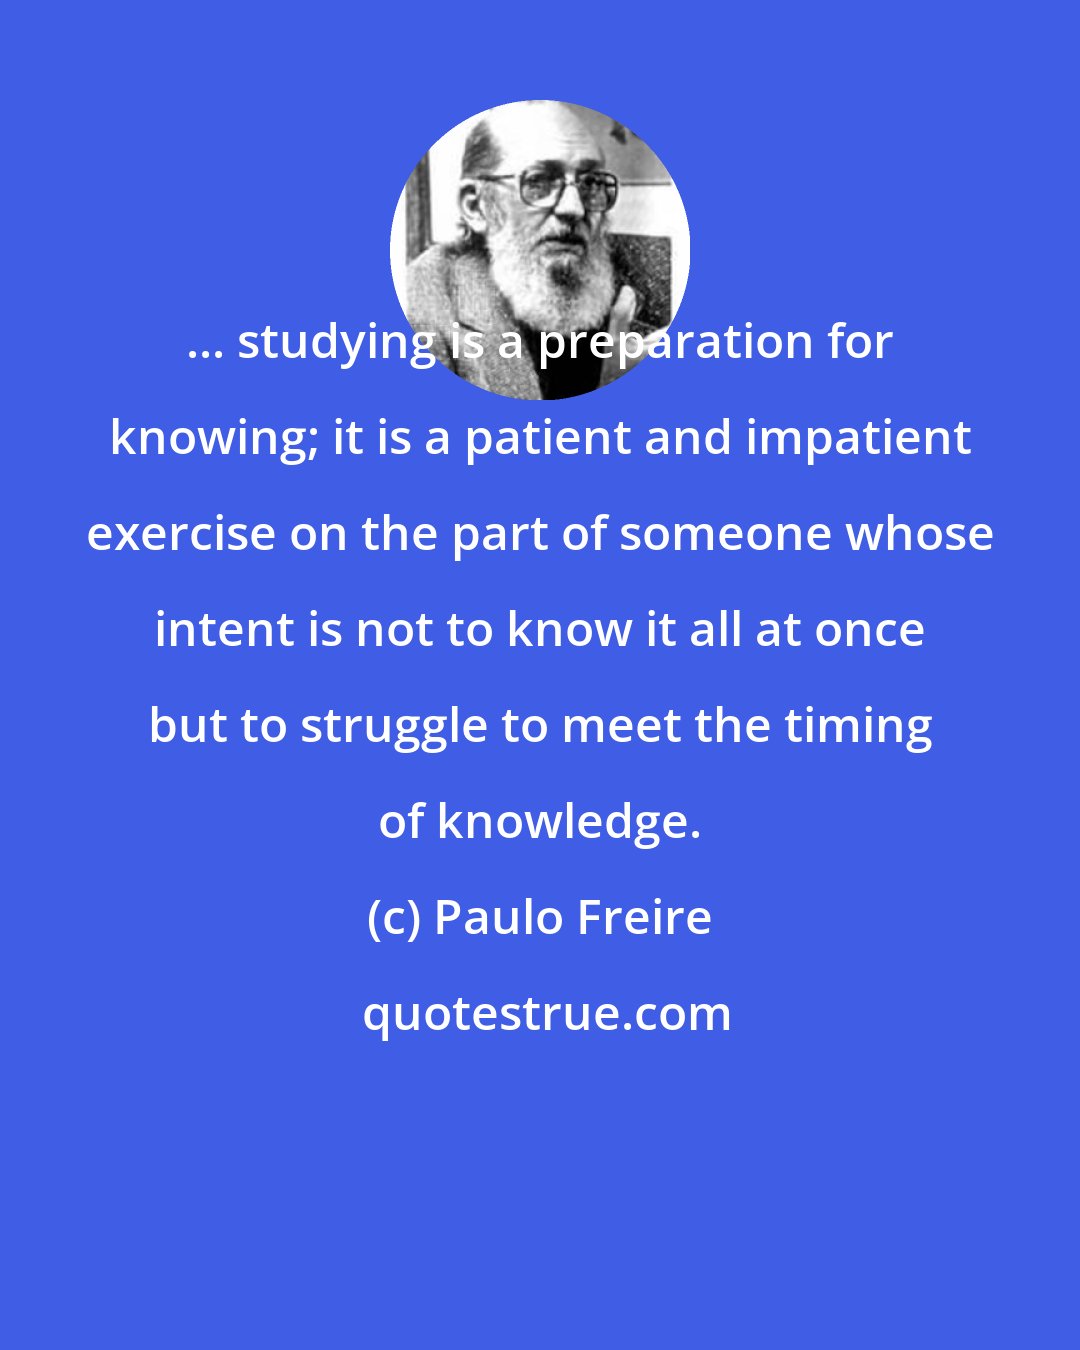 Paulo Freire: ... studying is a preparation for knowing; it is a patient and impatient exercise on the part of someone whose intent is not to know it all at once but to struggle to meet the timing of knowledge.